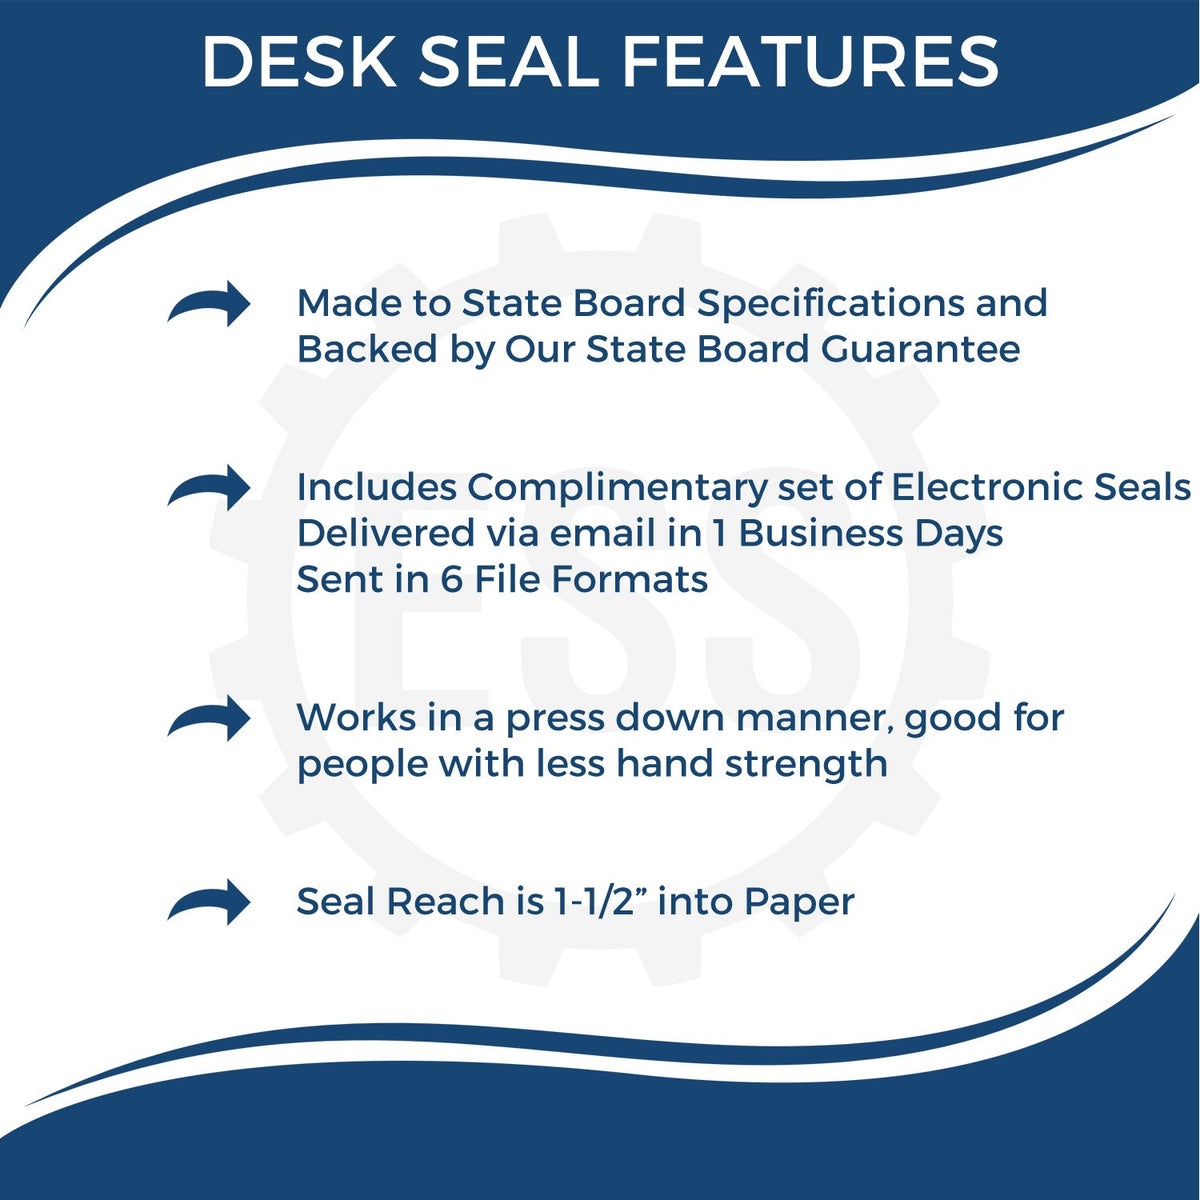 A picture of an infographic highlighting the selling points for the Florida Desk Architect Embossing Seal